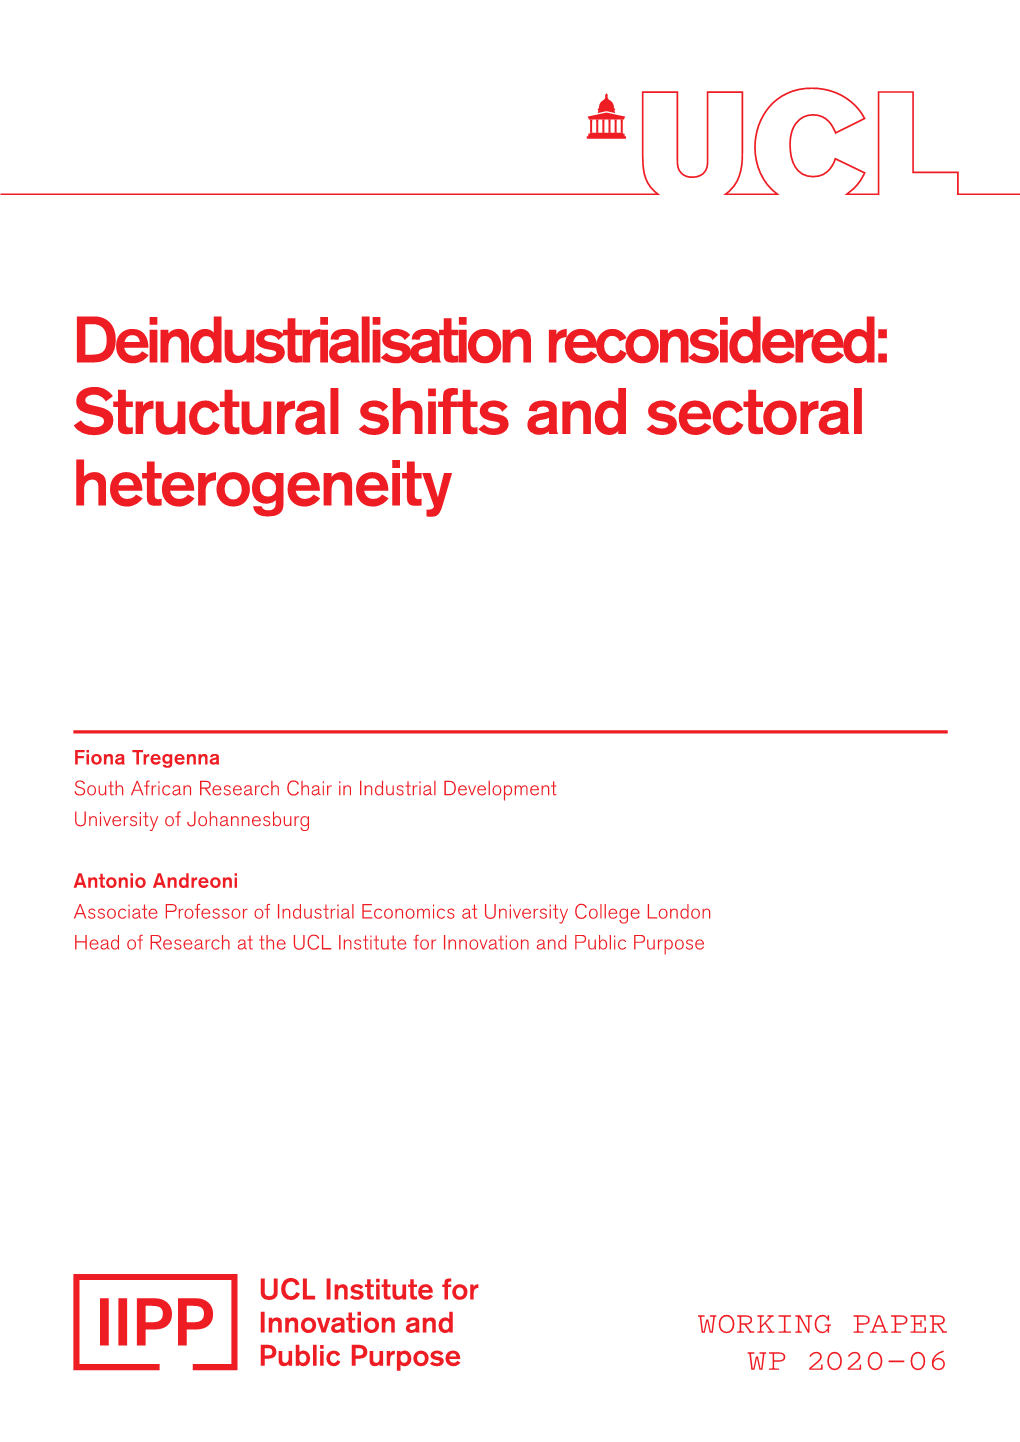 Deindustrialisation Reconsidered: Structural Shifts and Sectoral Heterogeneity